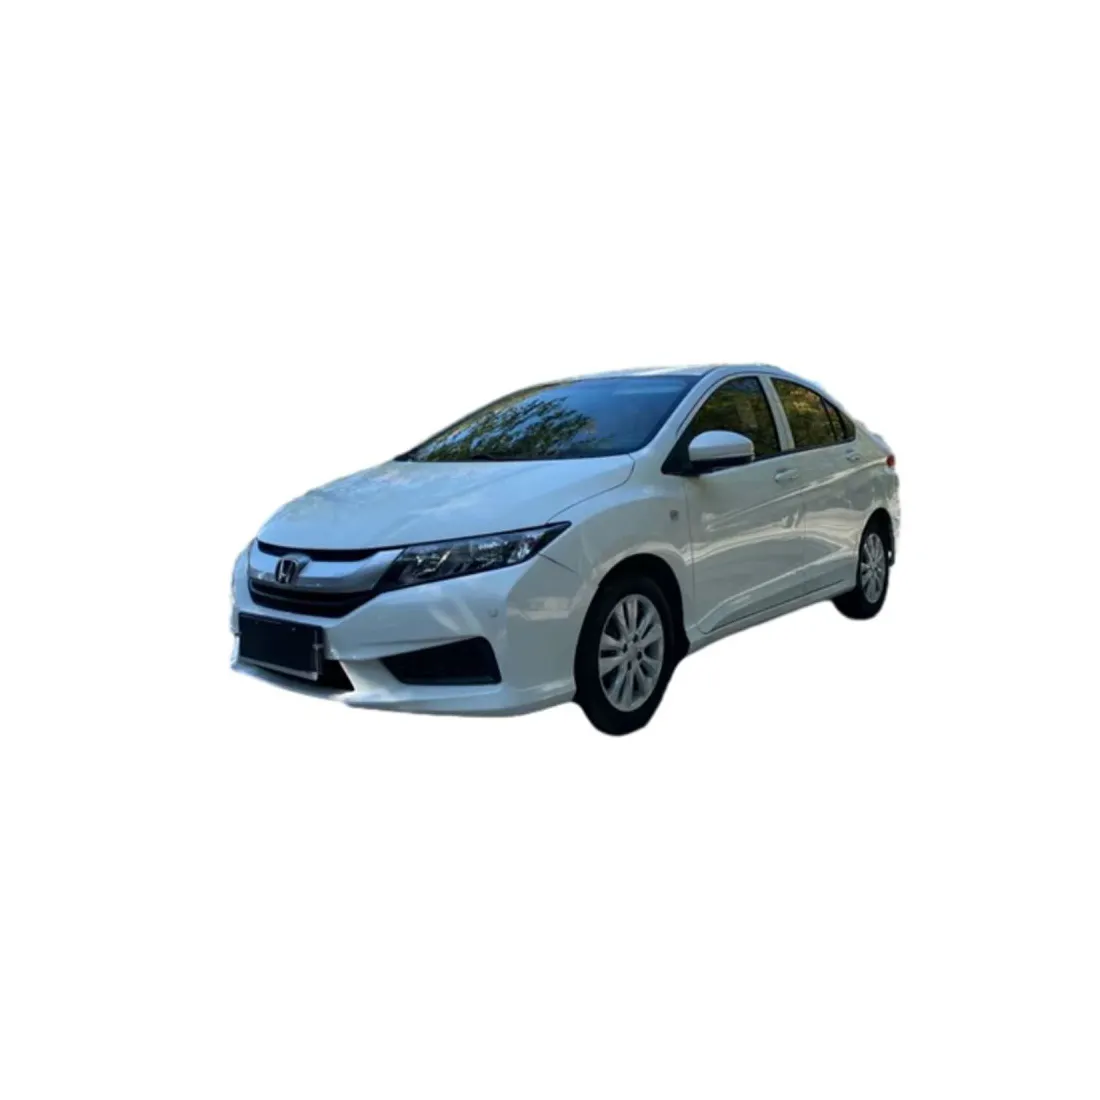 In Stock 5 days delivery best price 2017 Honda CITY 1.5L CVT for sale,chinese used cars second hand vehicles cheap car